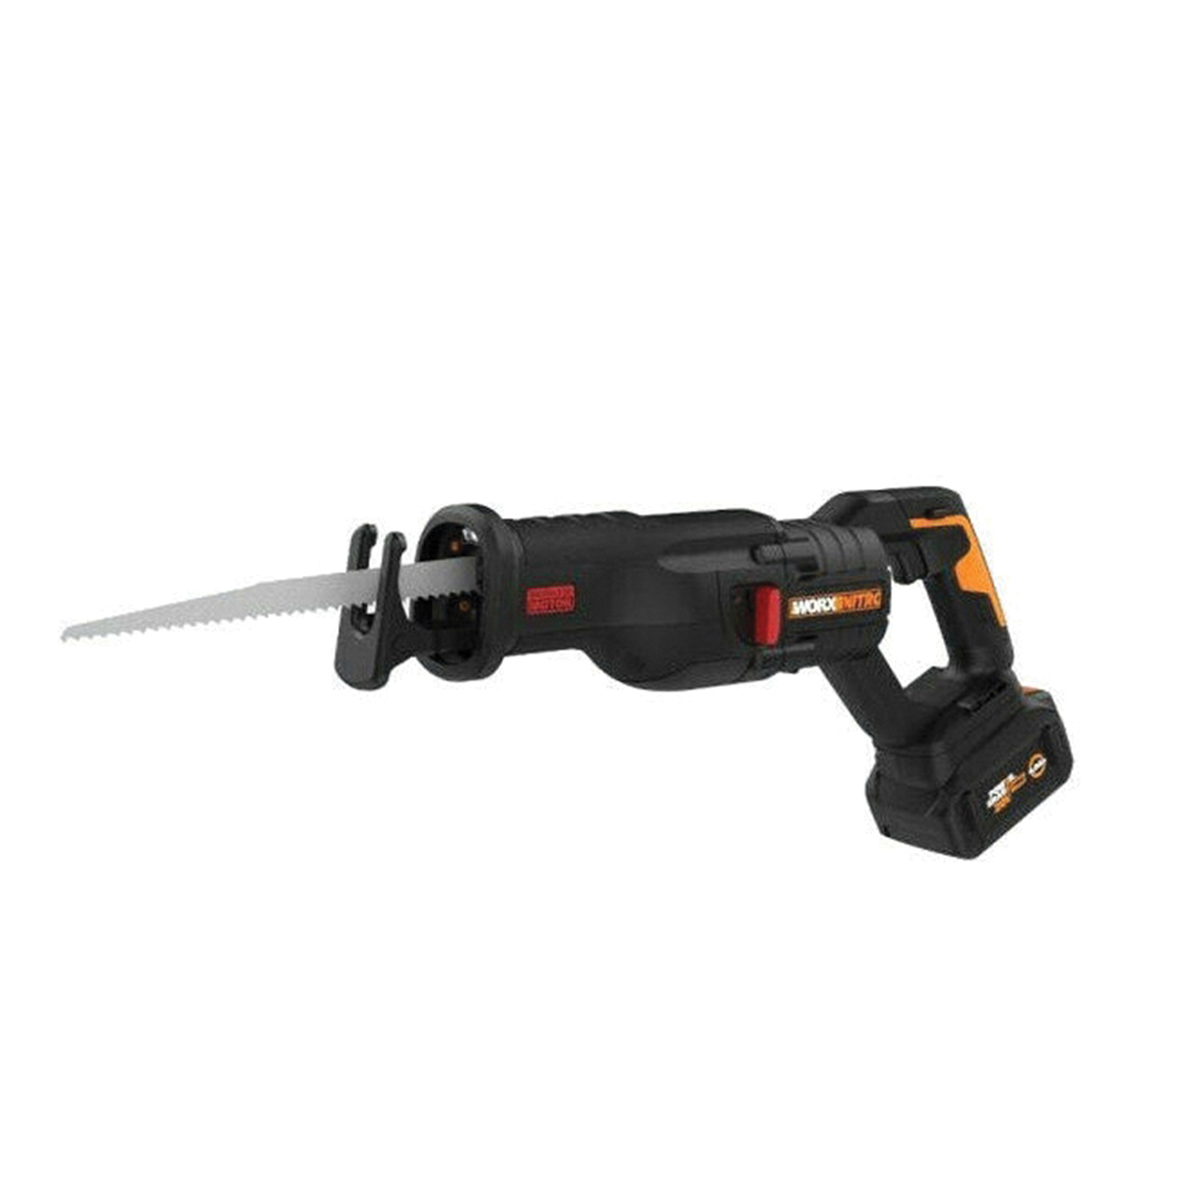 WX516L Cordless Reciprocating Saw with Brushless Motor, Battery Included, 20 V, 4 Ah, 1-3/16 in L Stroke